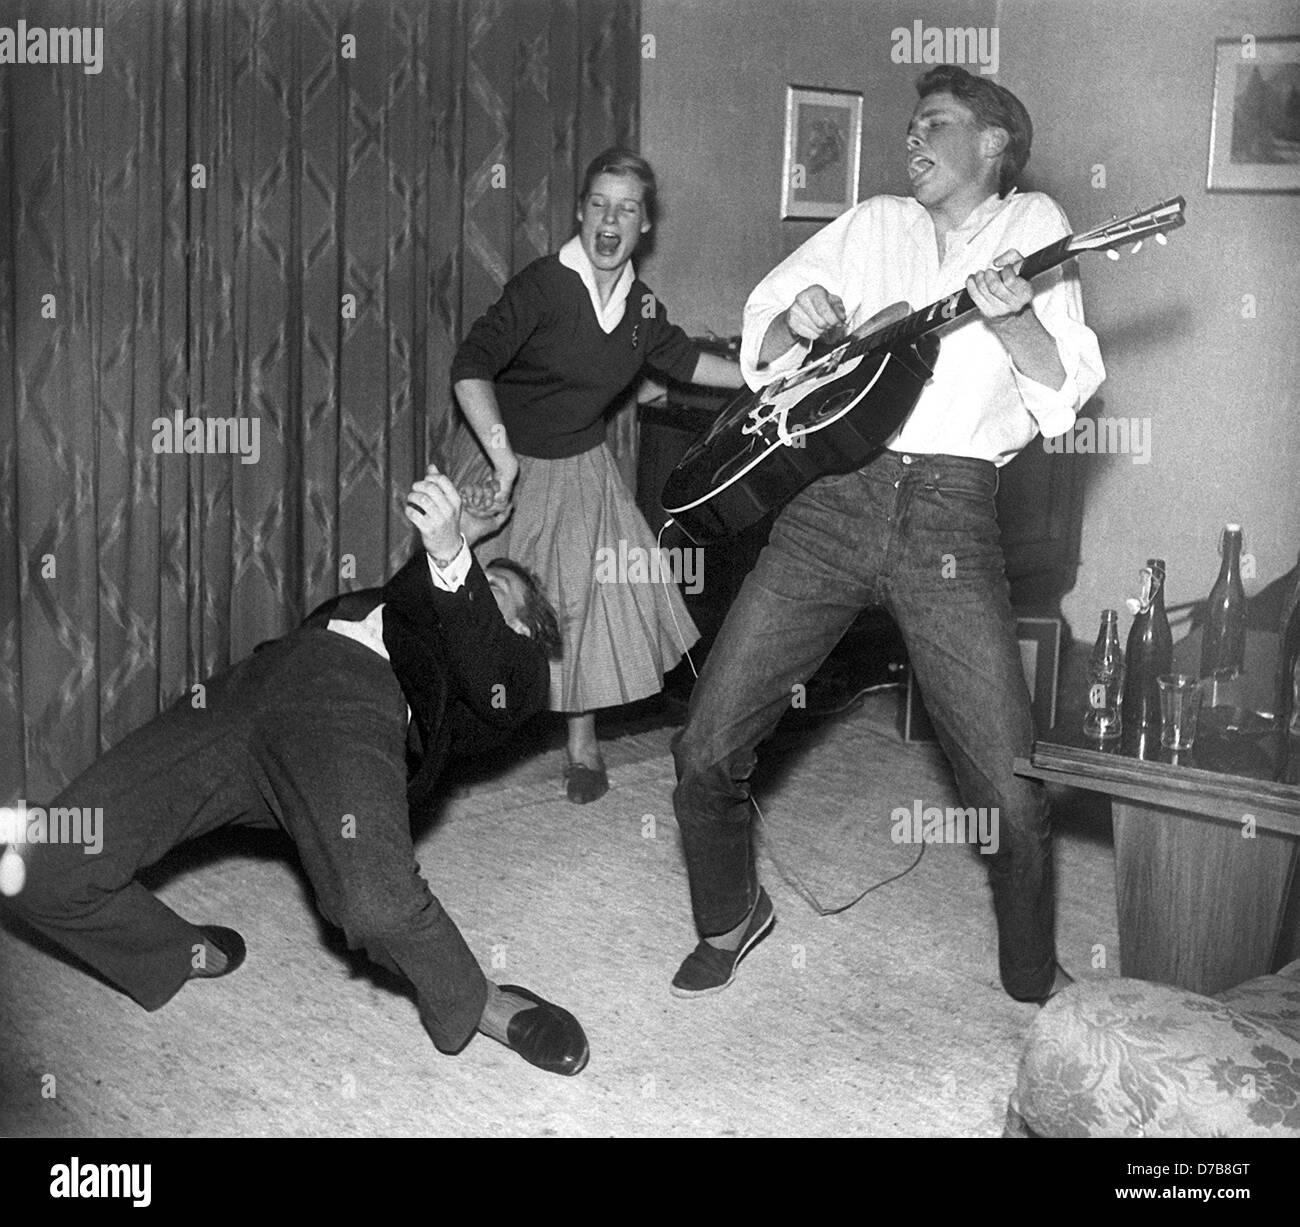 Peter Kraus (r), 17-years-old, performs a rock'n'roll song with his  friends. Photographed in December 1956 in Munich Stock Photo - Alamy